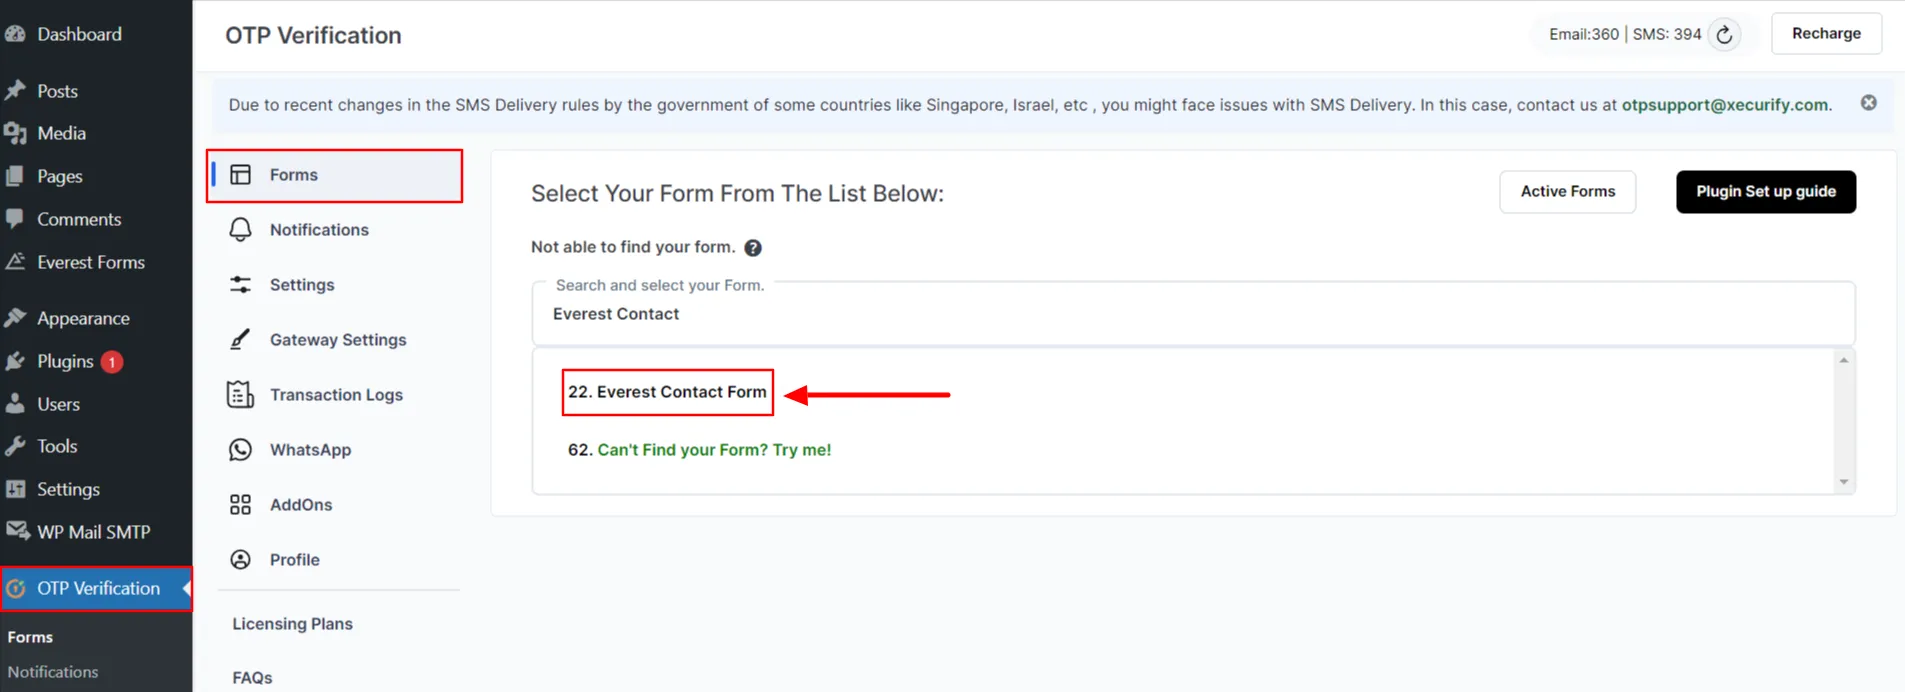 Everest Contact form - search User Registration Forms